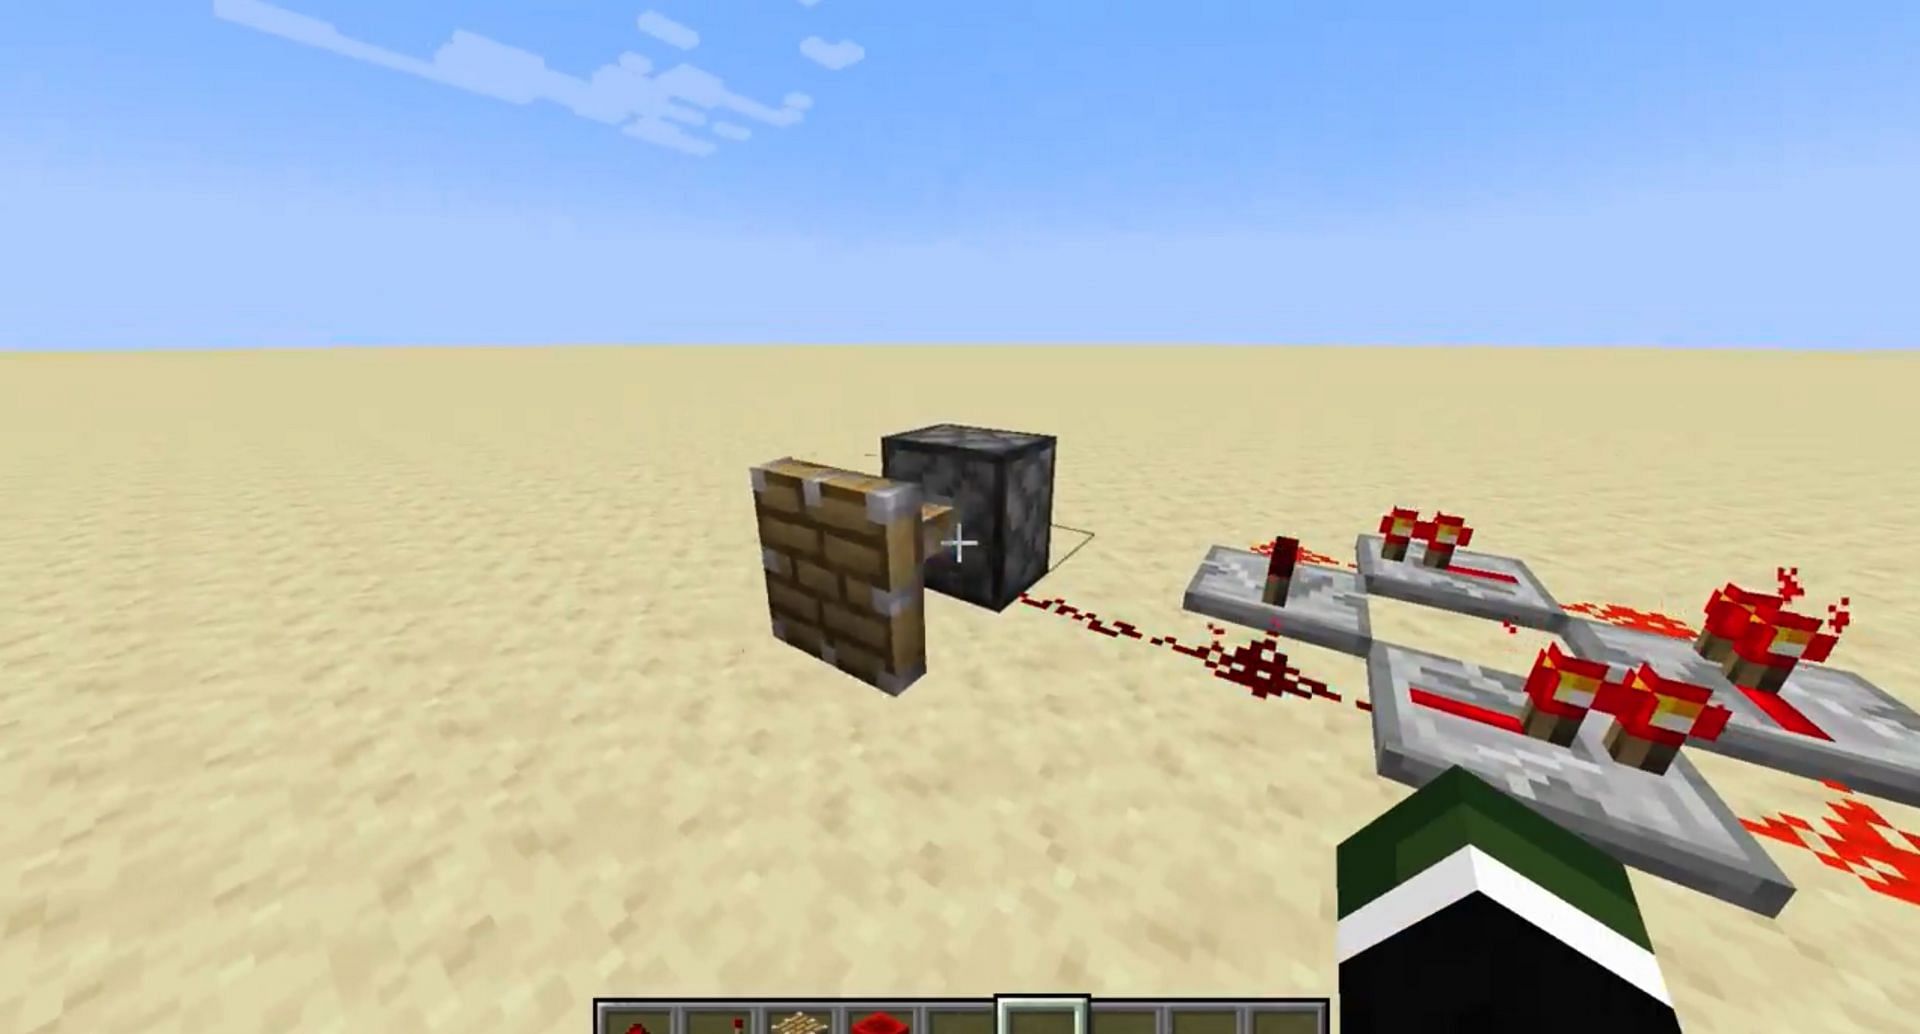 The piston sound can be annoying when played repeatedly (Image via X/eckoxsoldier)